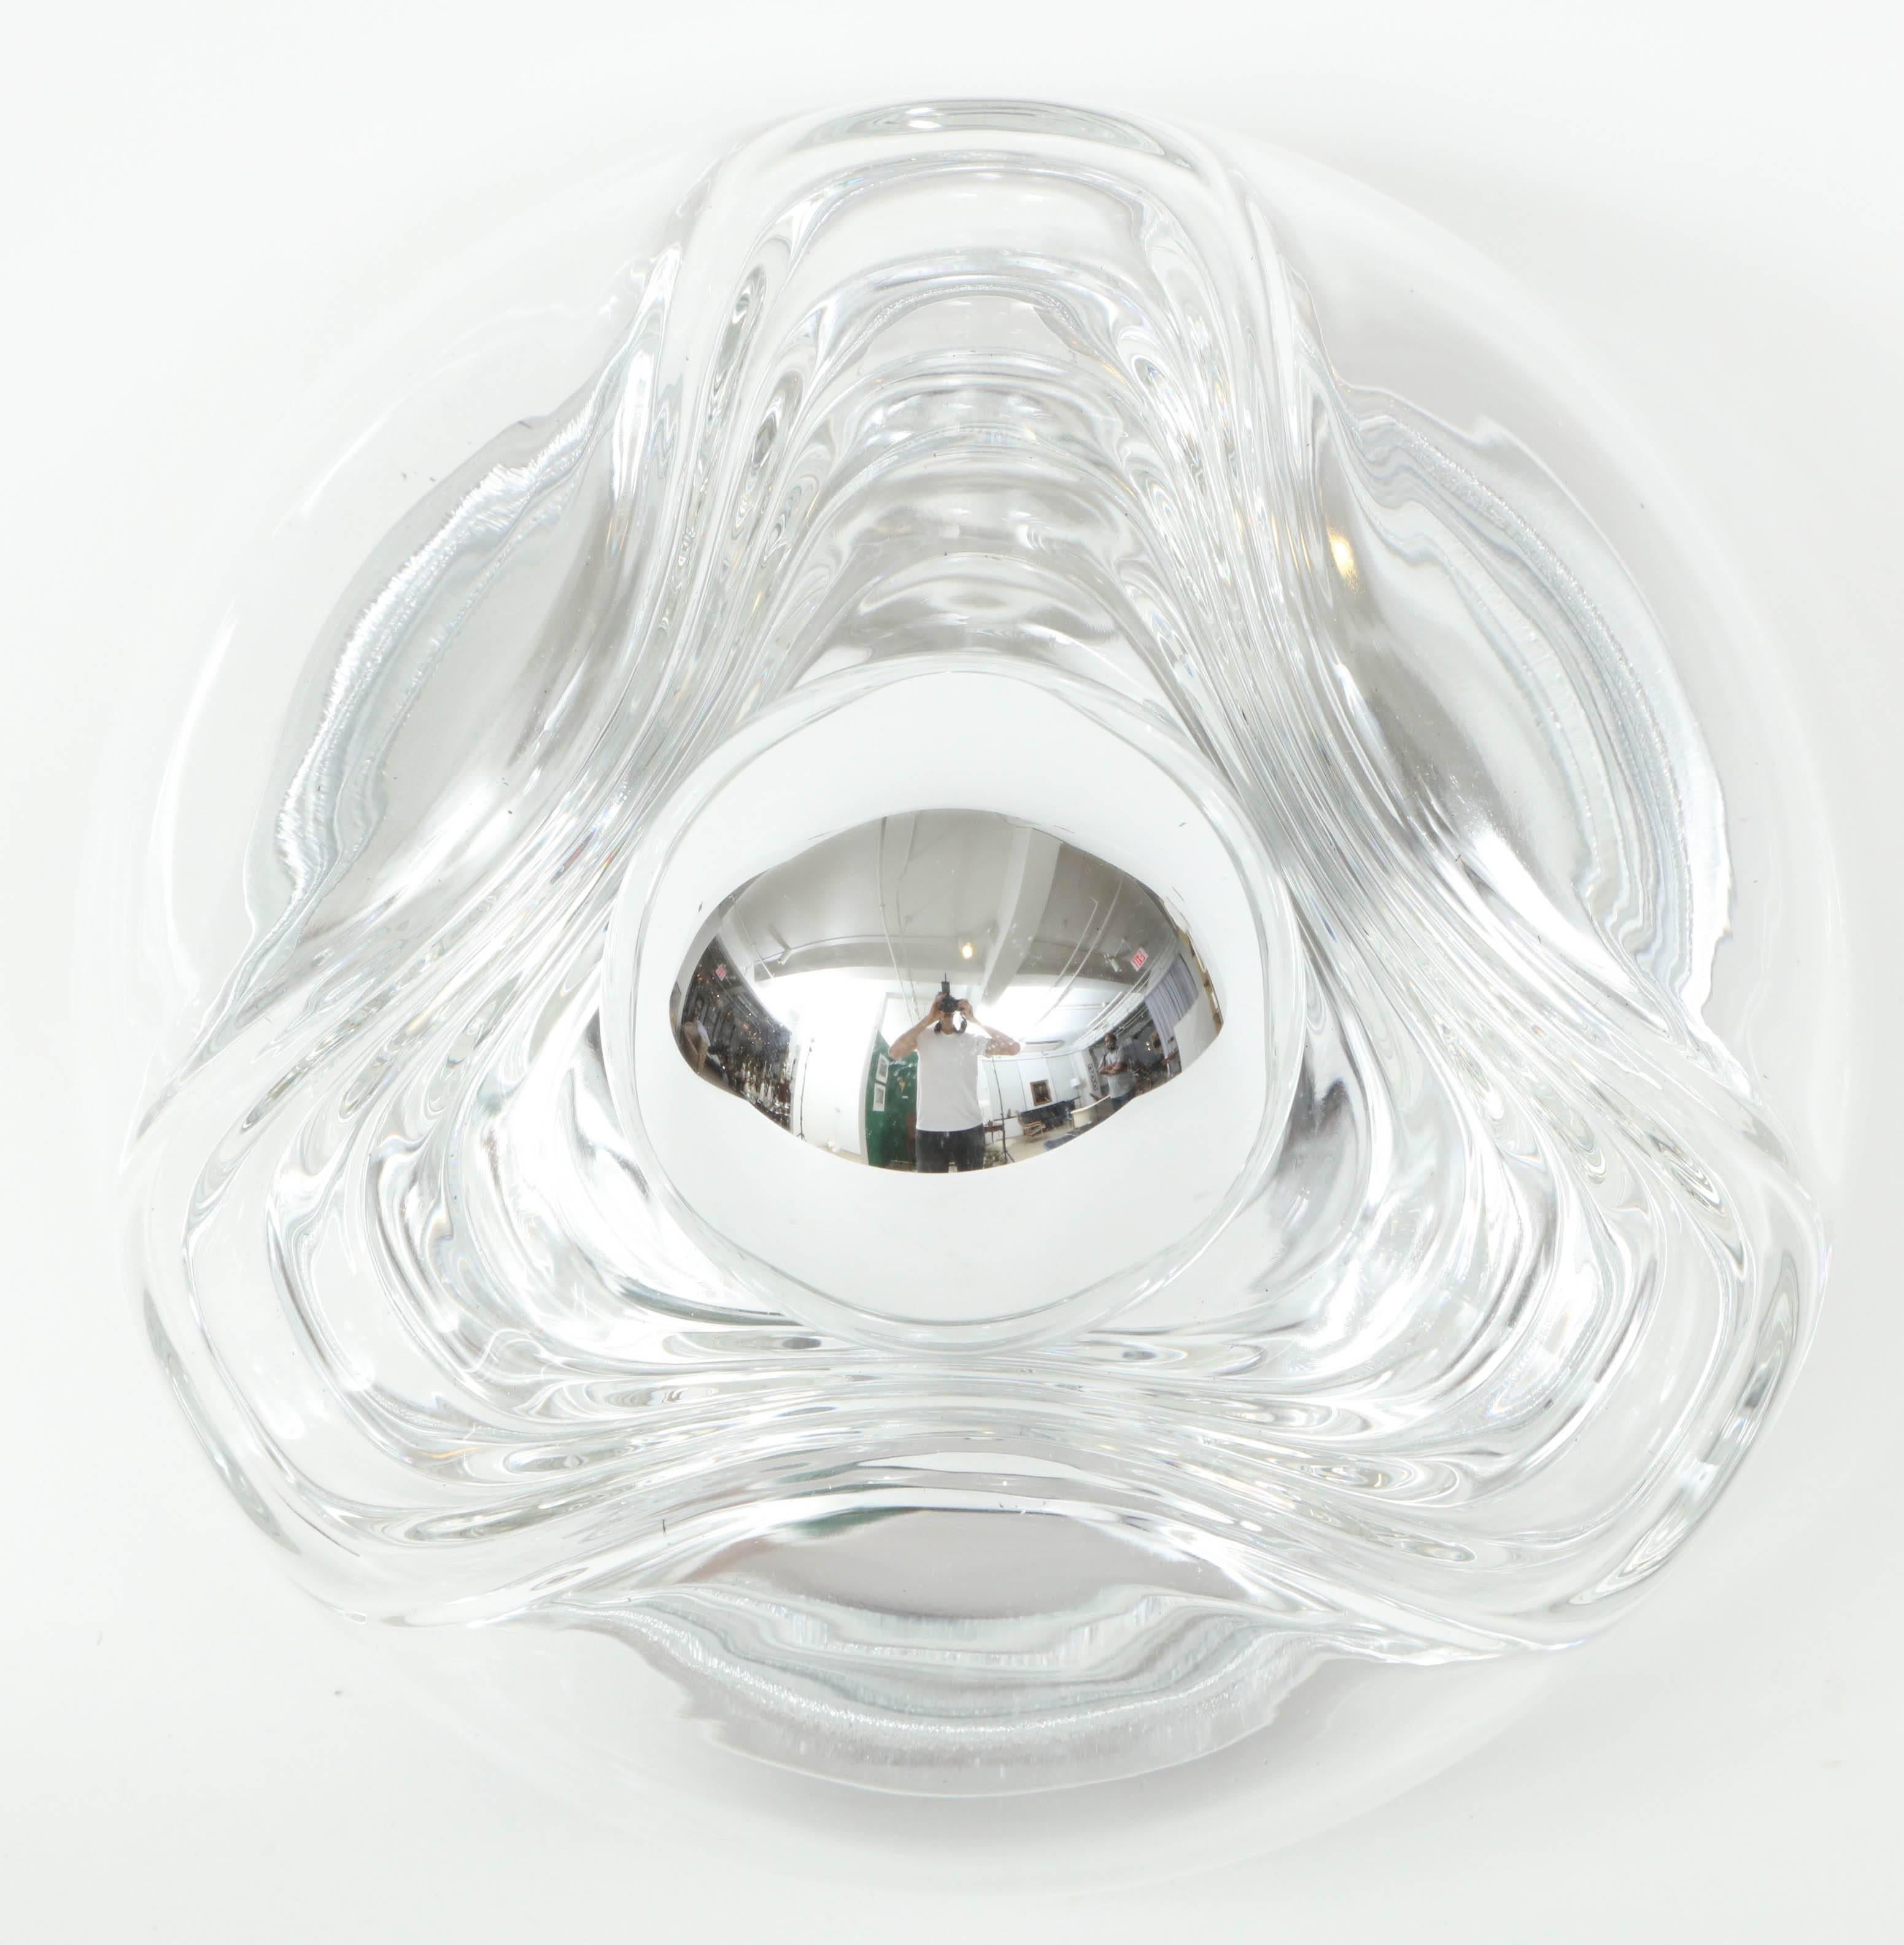 Pair of Scandinavian Modern clear glass round sconces with a wave detail. Rewired for use in the USA. Shown here with chrome tipped bulbs.

Only 1 pair is available